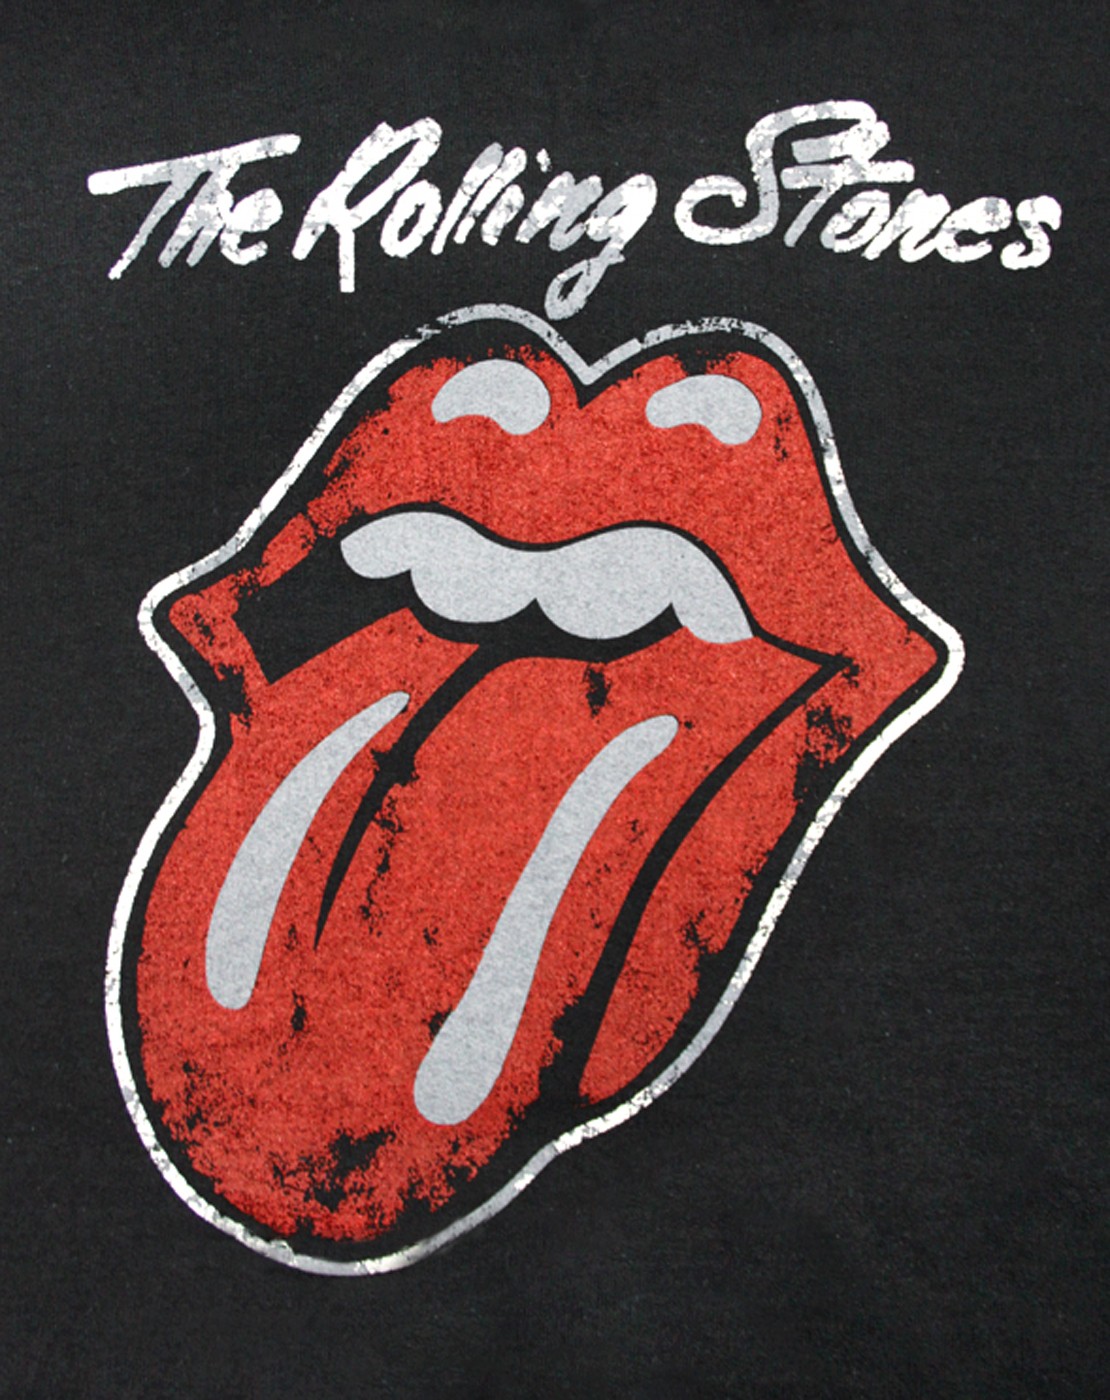 Under My Thumb by The Rolling Stones.